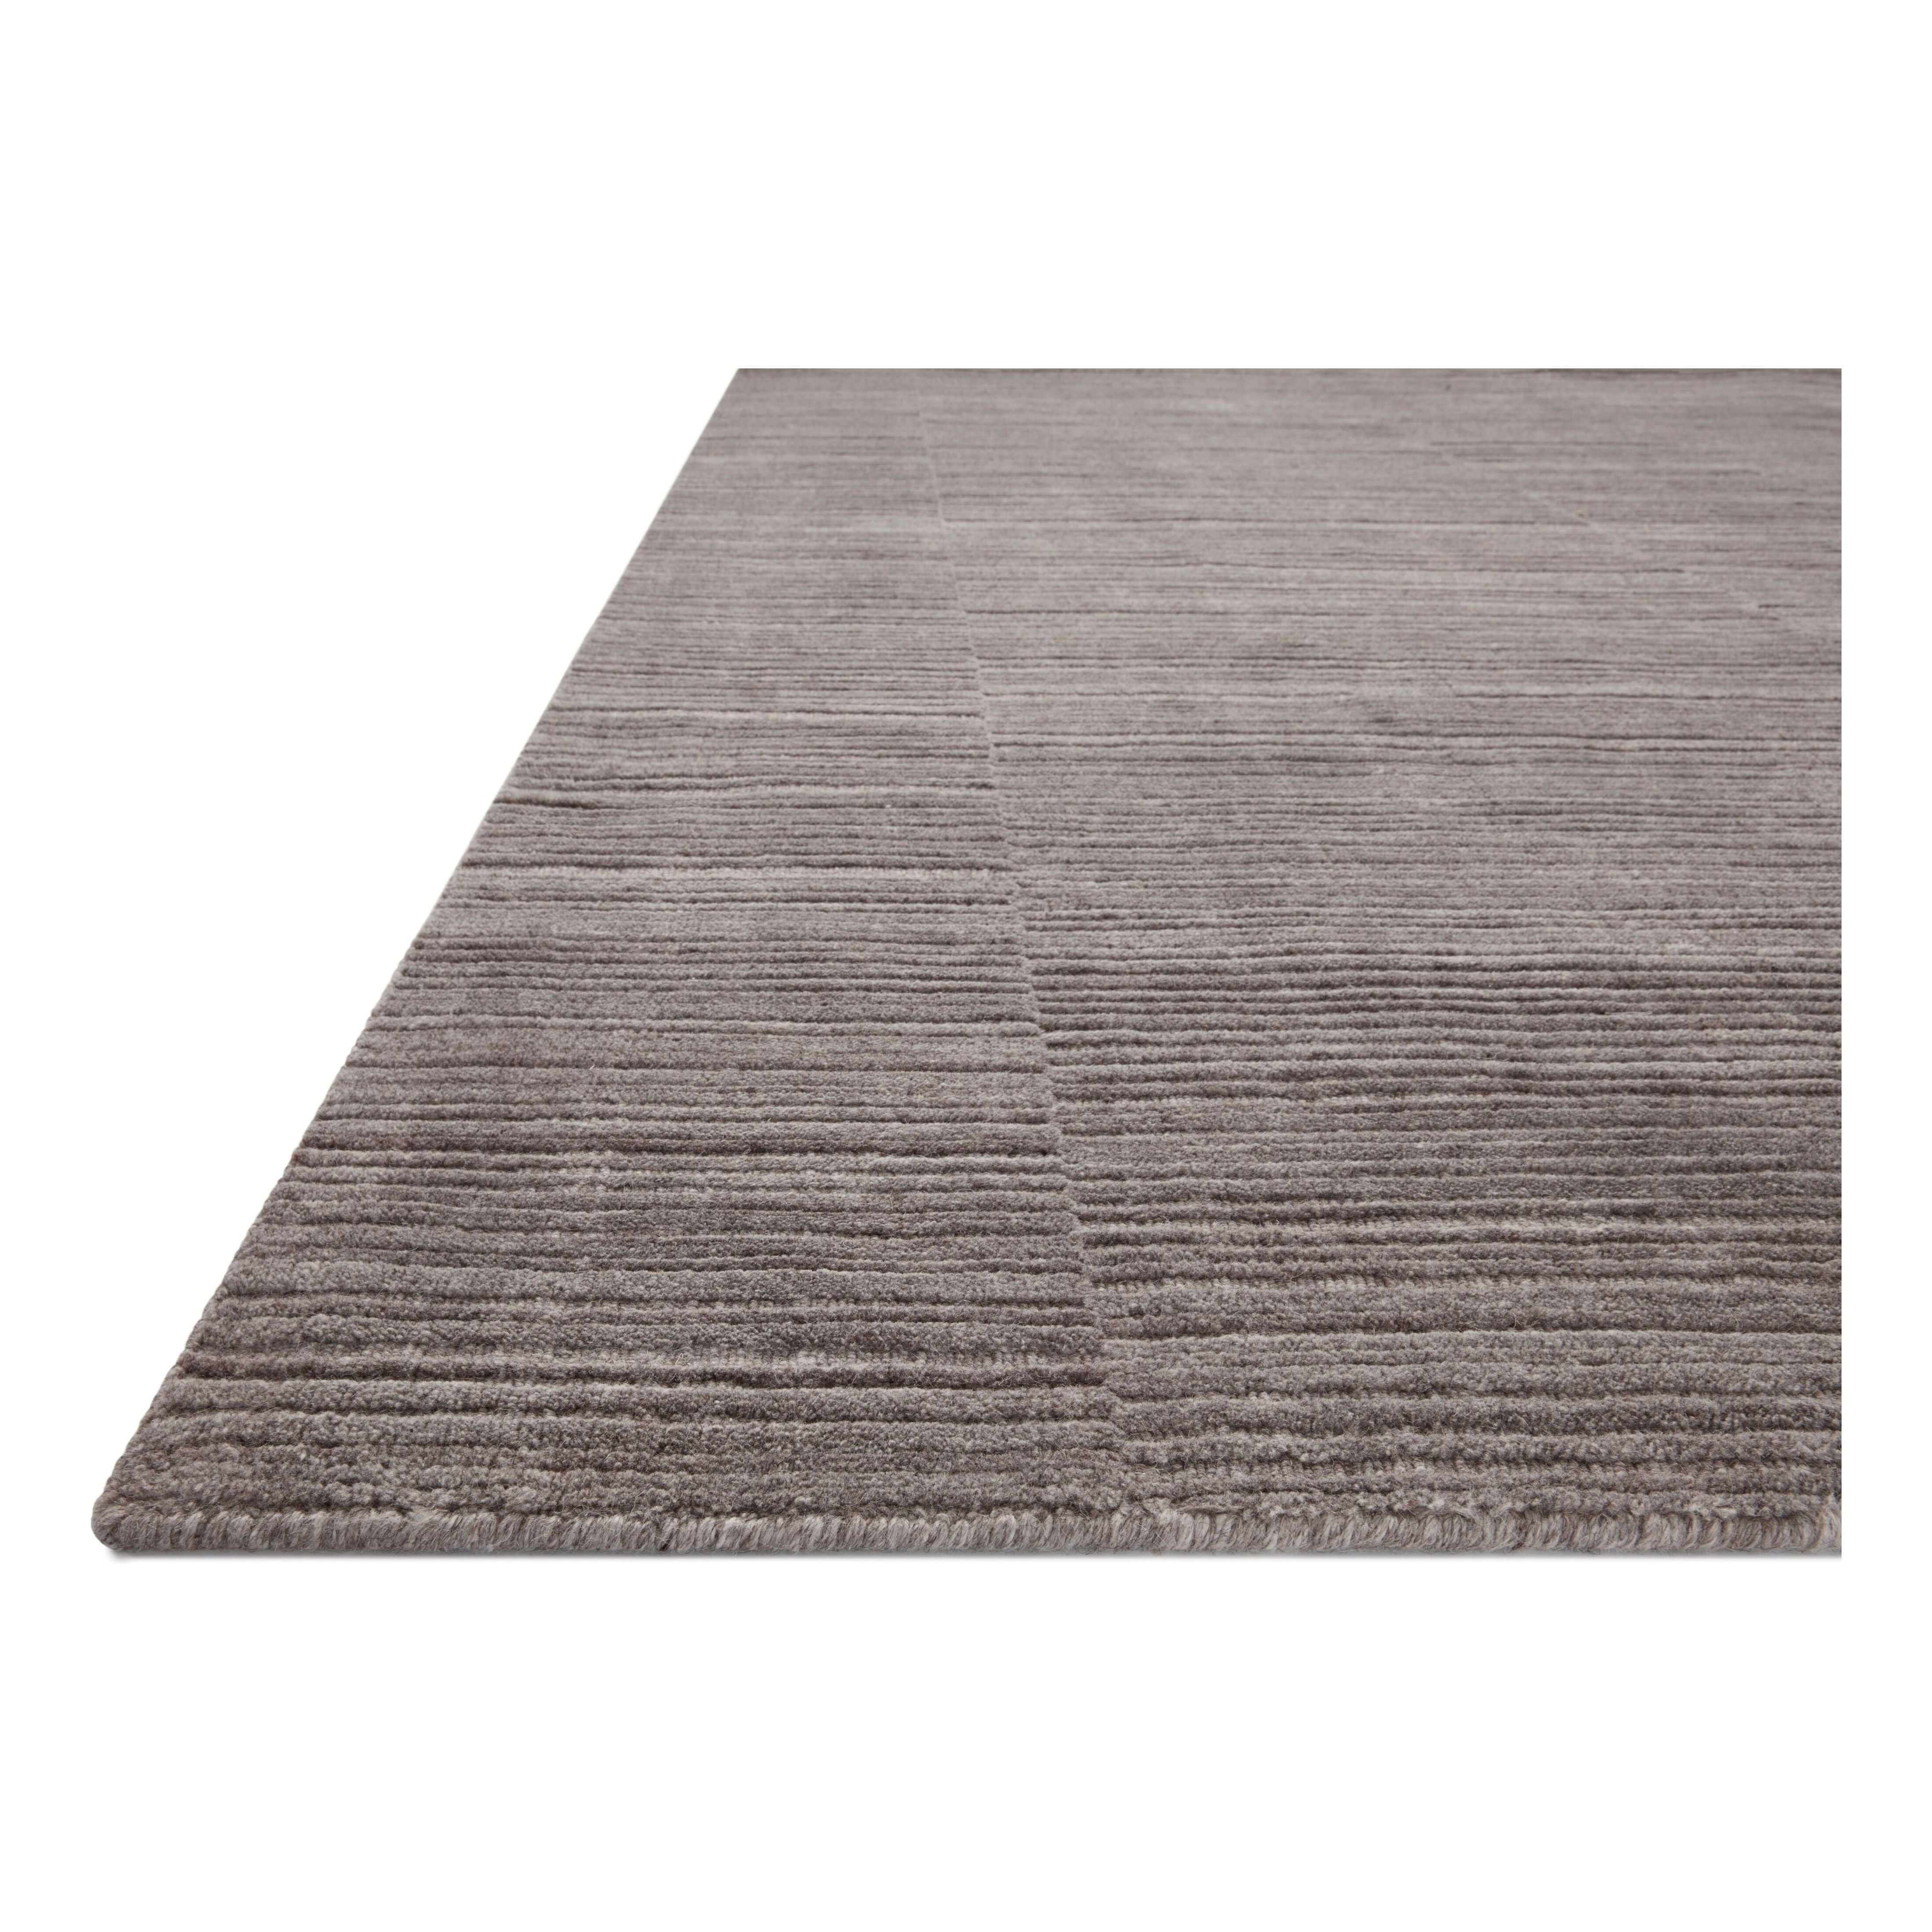 Sleek and modern, the Lou Collection is a luxurious hand-loomed area rug by Amber Lewis x Loloi. While the rug presents a minimal aesthetic, up close, it has a broken stripe pattern that creates a slightly ribbed effect. It’s made with a blend of wool and viscose that’s soft and durable, an elevated neutral for any room. Amethyst Home provides interior design, new home construction design consulting, vintage area rugs, and lighting in the Des Moines metro area.